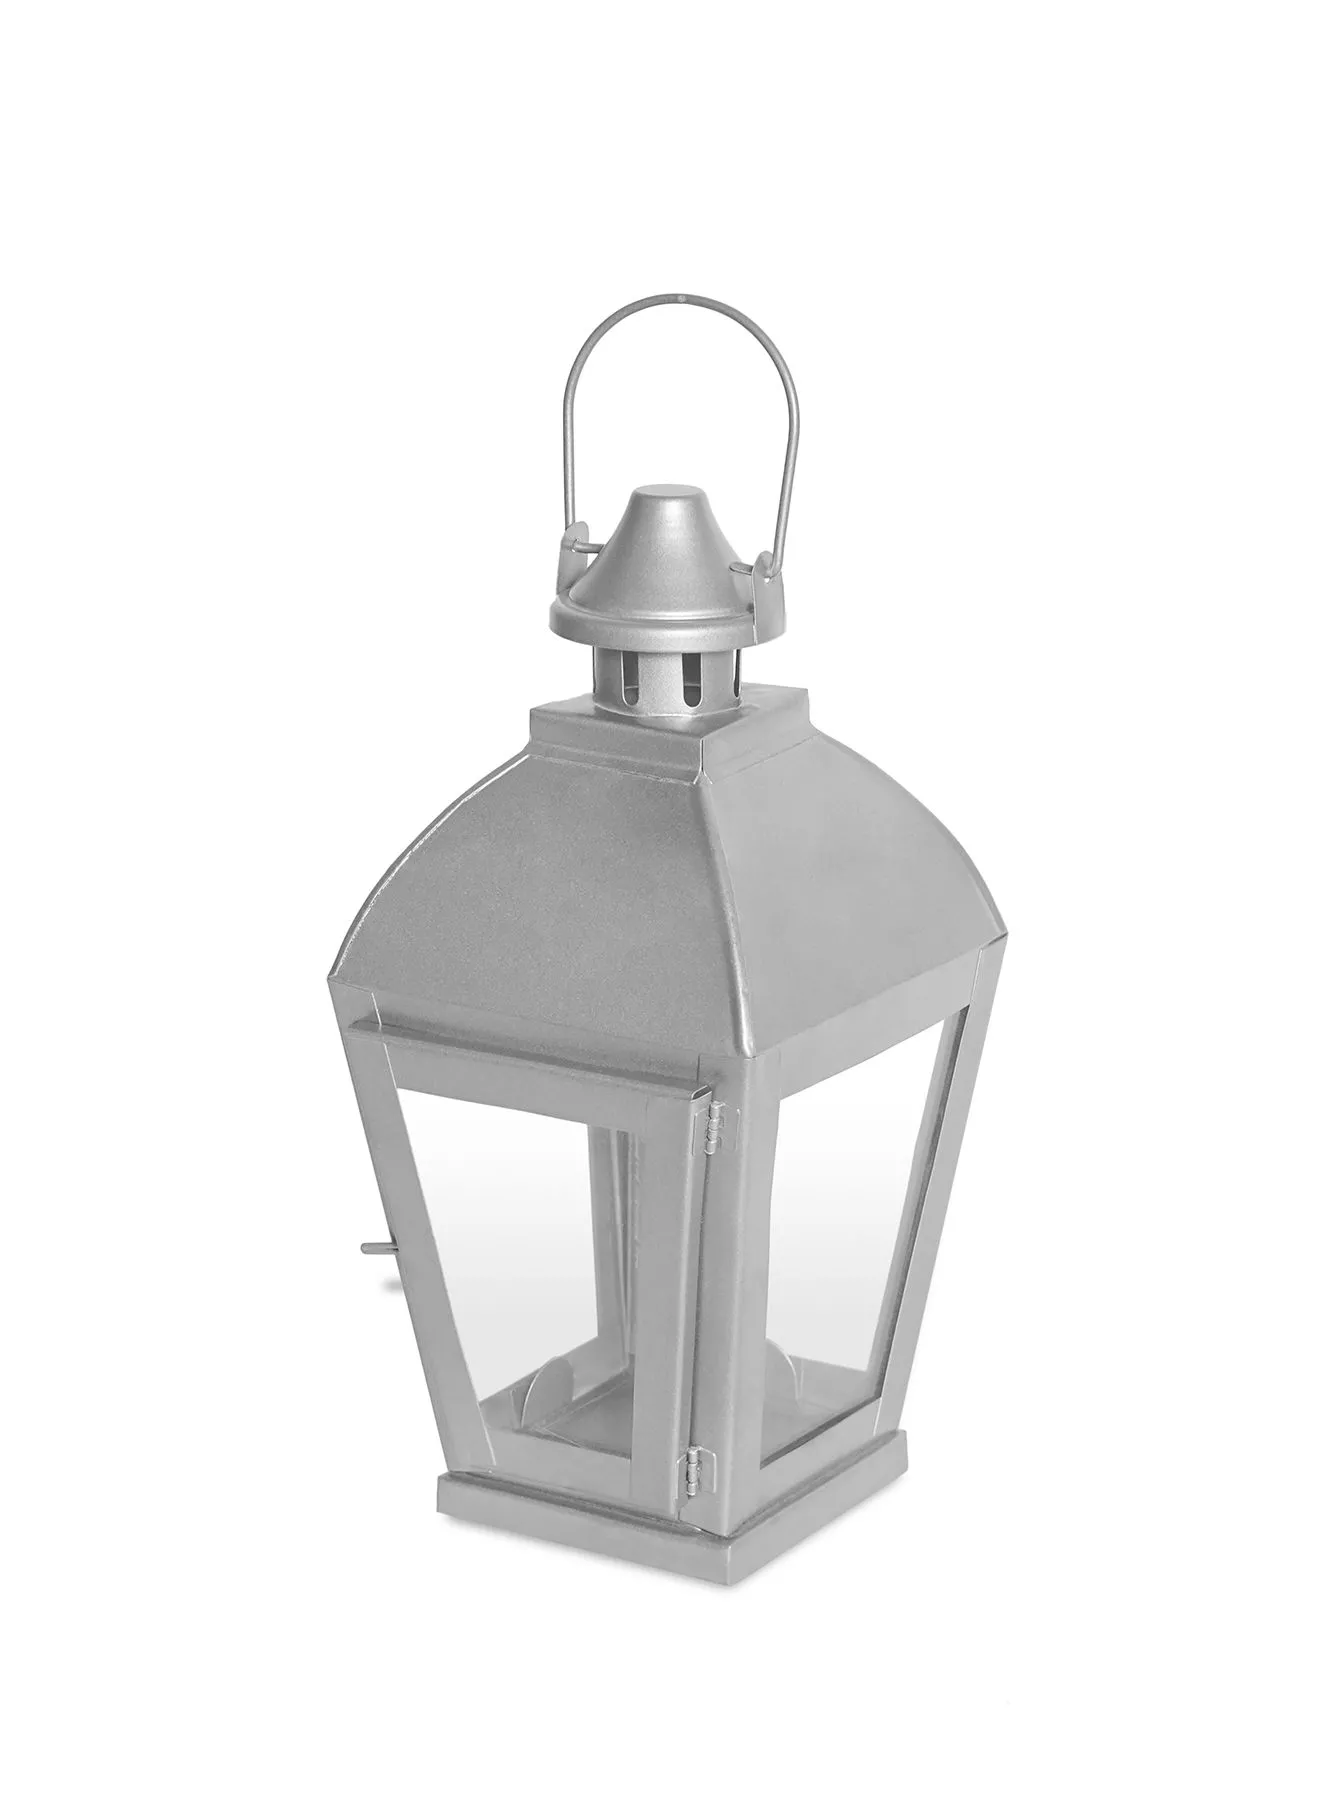 ebb & flow Modern Ideal Design Handmade Lantern Unique Luxury Quality Scents For The Perfect Stylish Home Silver 8.63X8.63X27centimeter